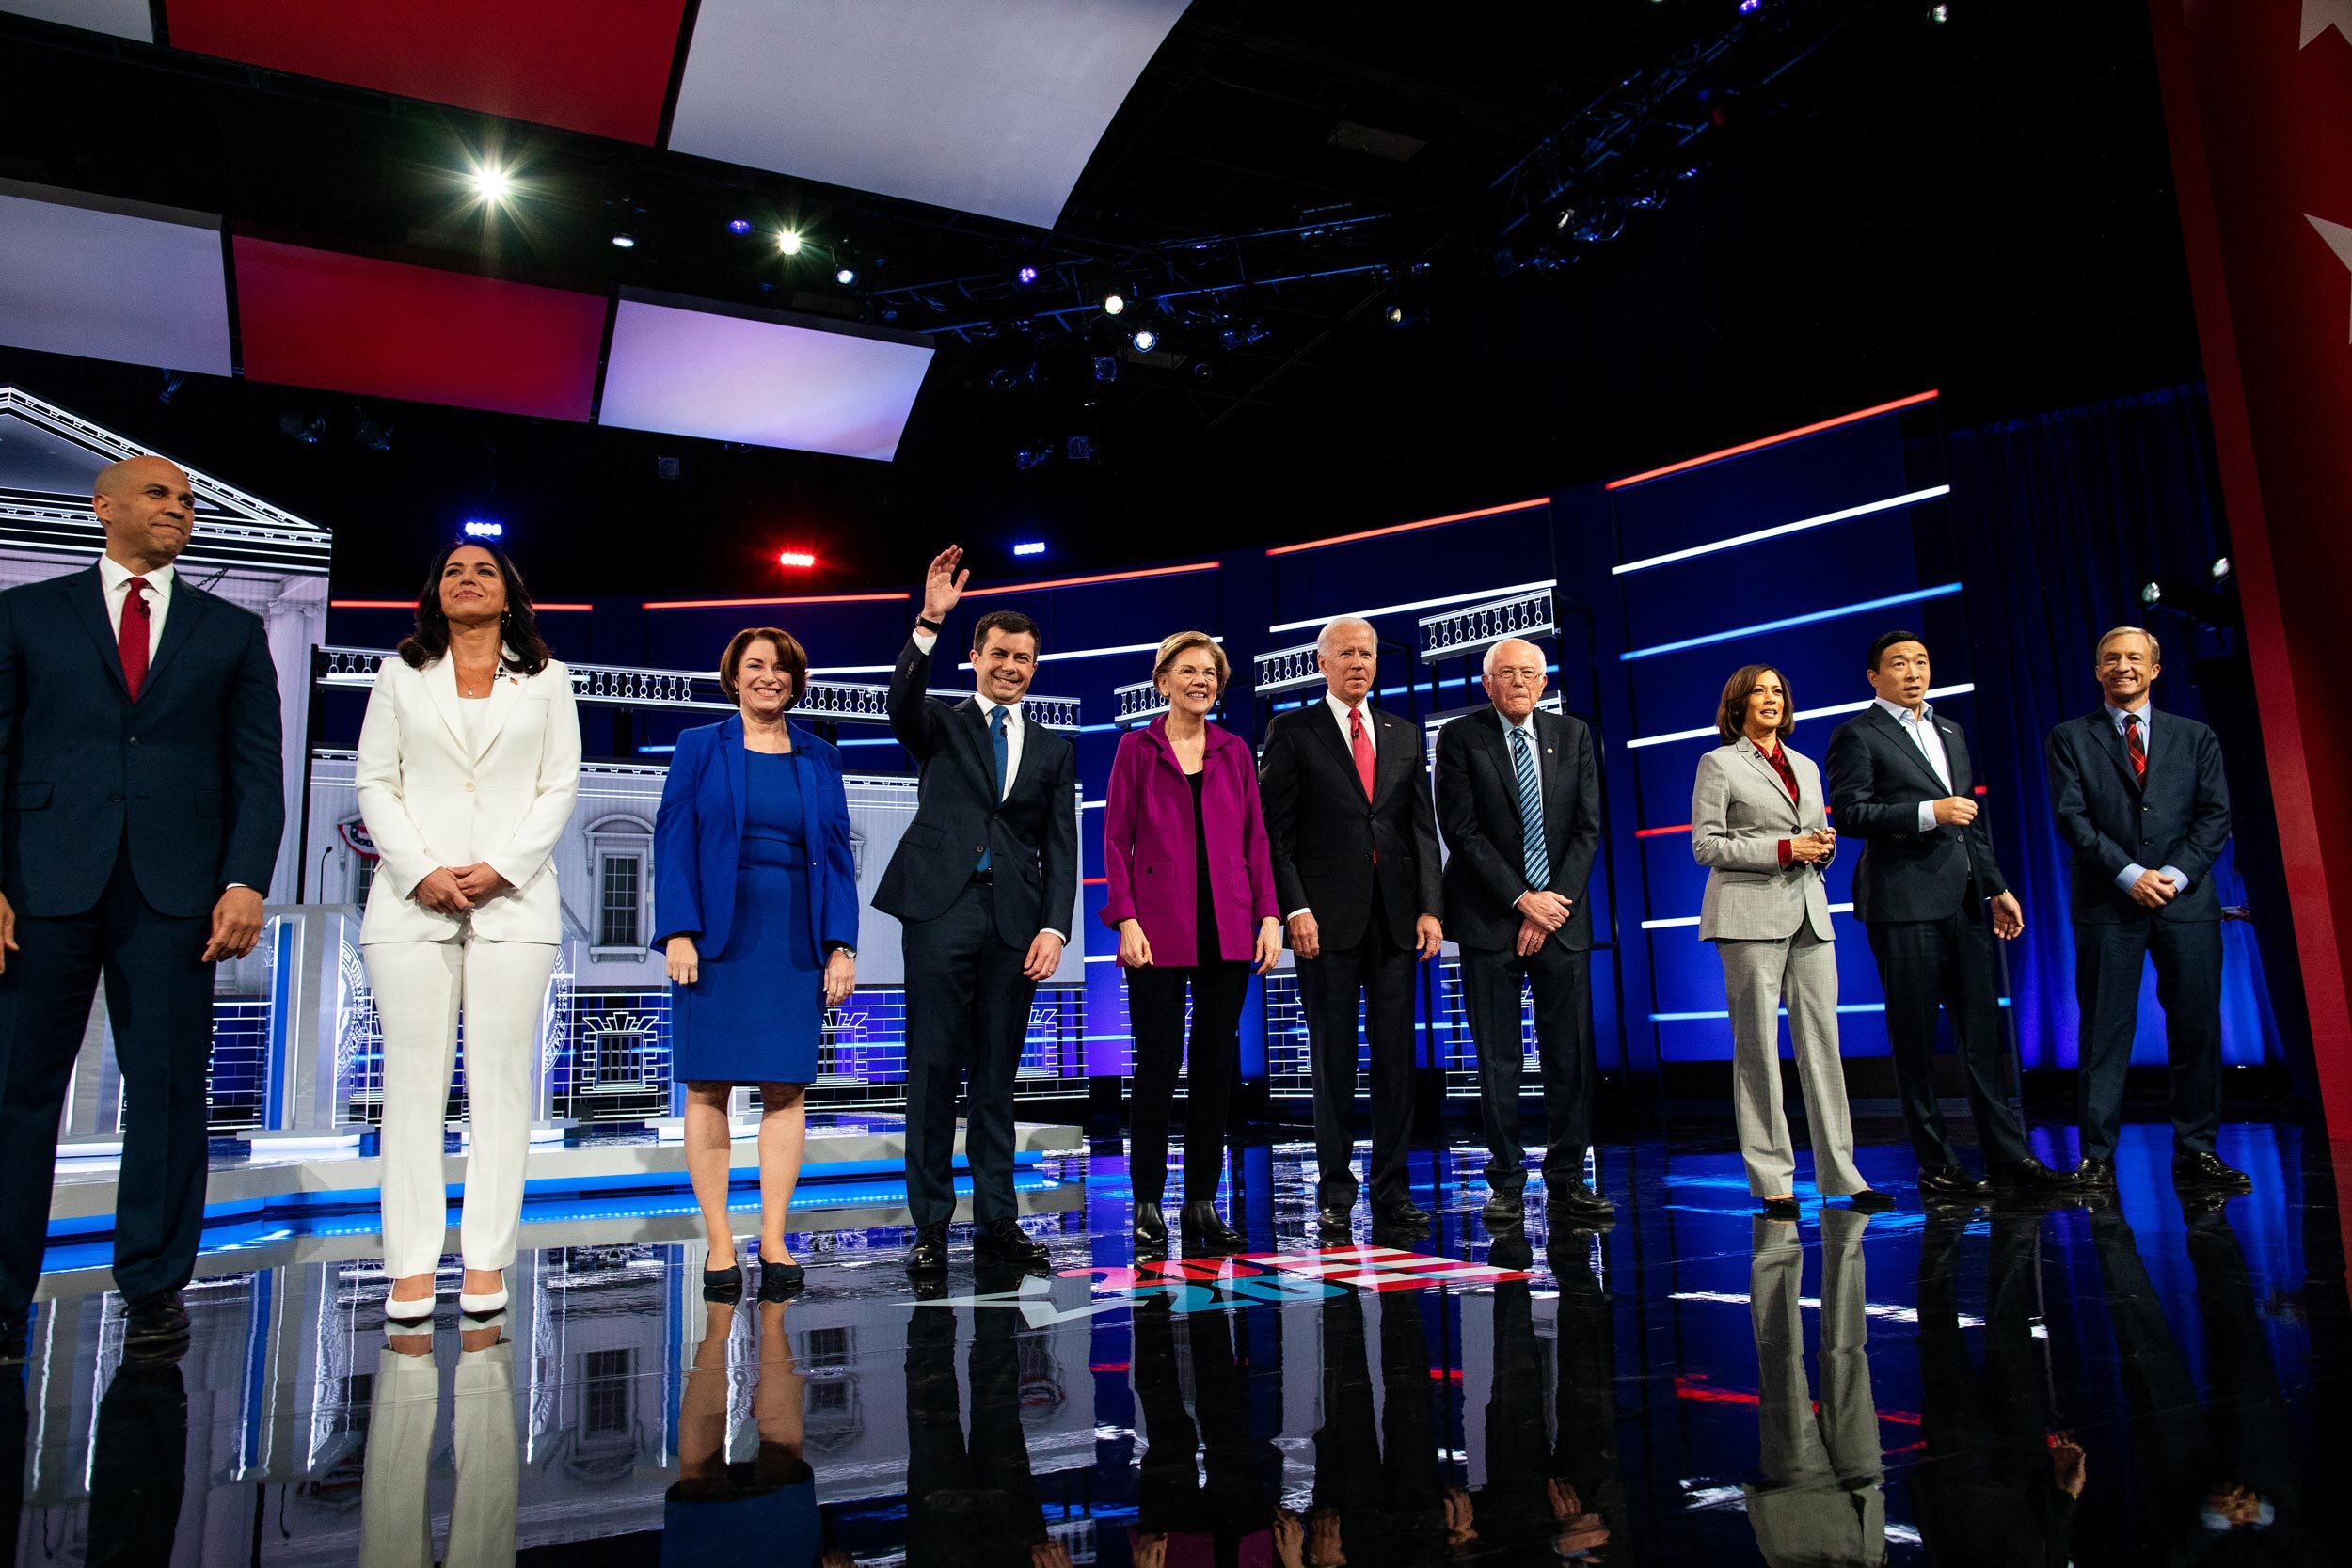   Candidates before the Democratic presidential debate in Atlanta, Ga. The debate was hosted by NBC and The Washington Post at Tyler Perry Studios. 